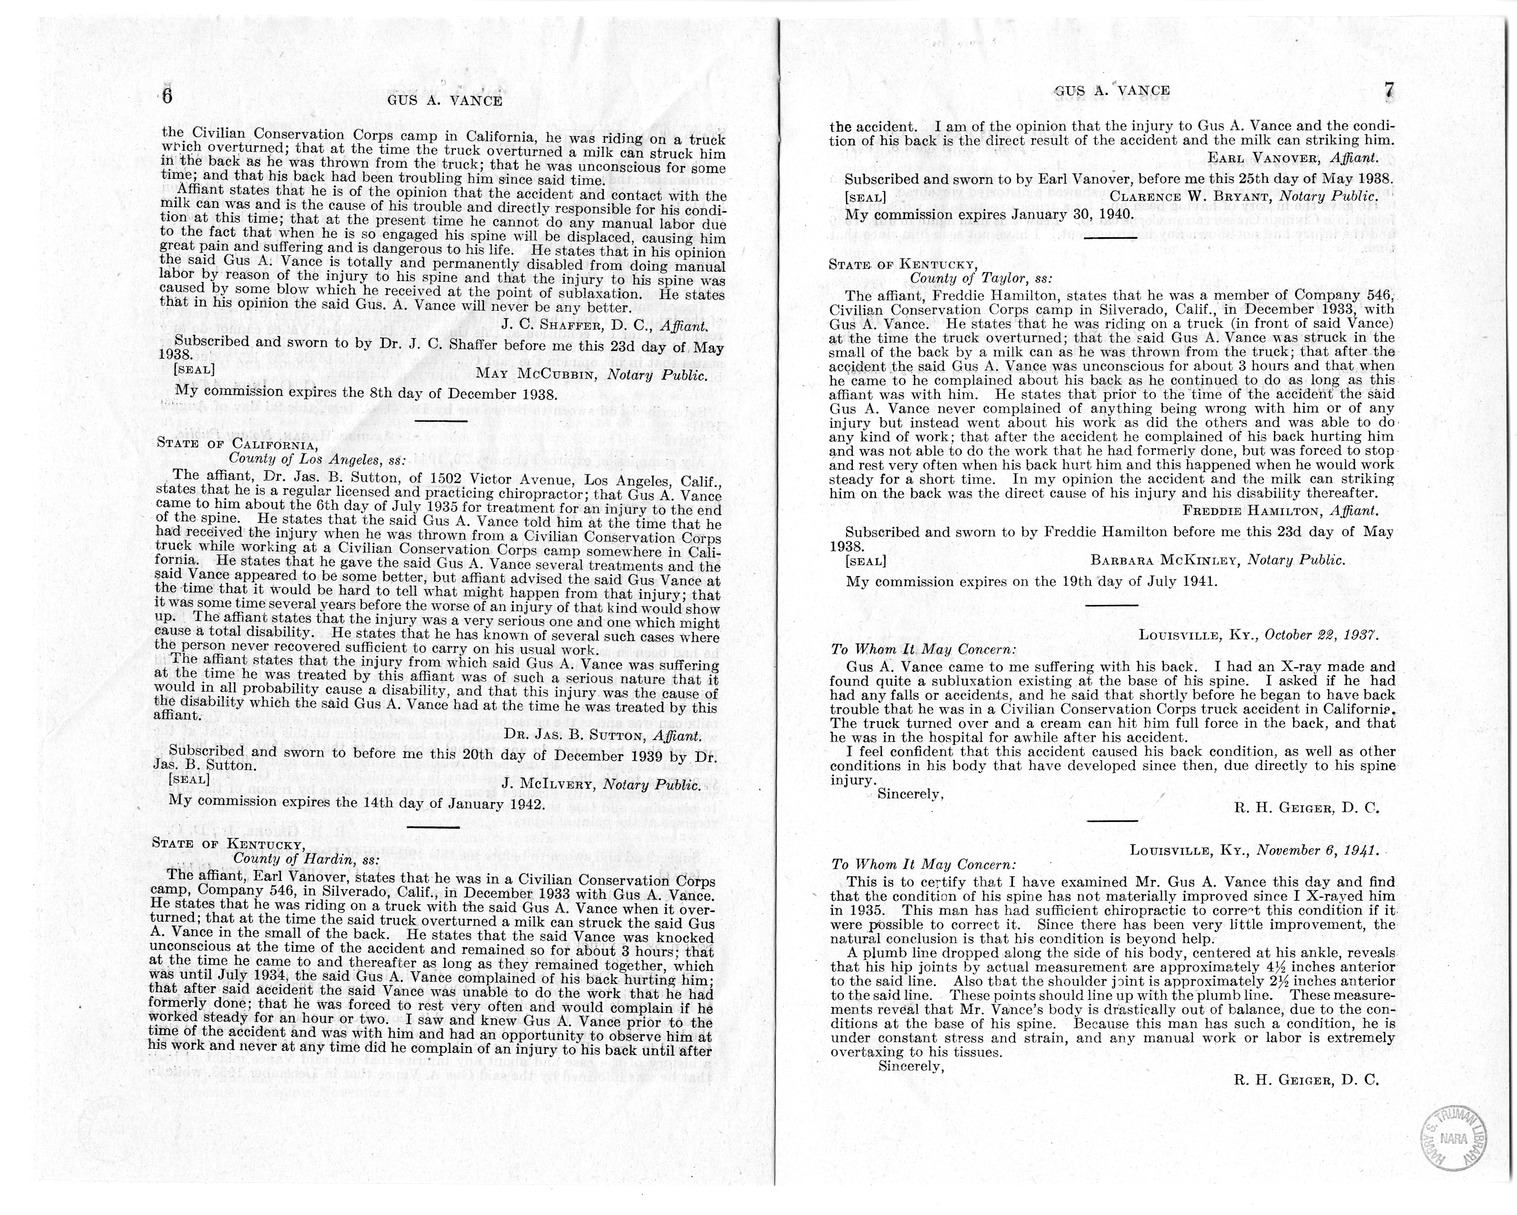 Memorandum from F. J. Bailey to M. C. Latta, H. R. 1135, for the Relief of Gus A. Vance, with Attachments